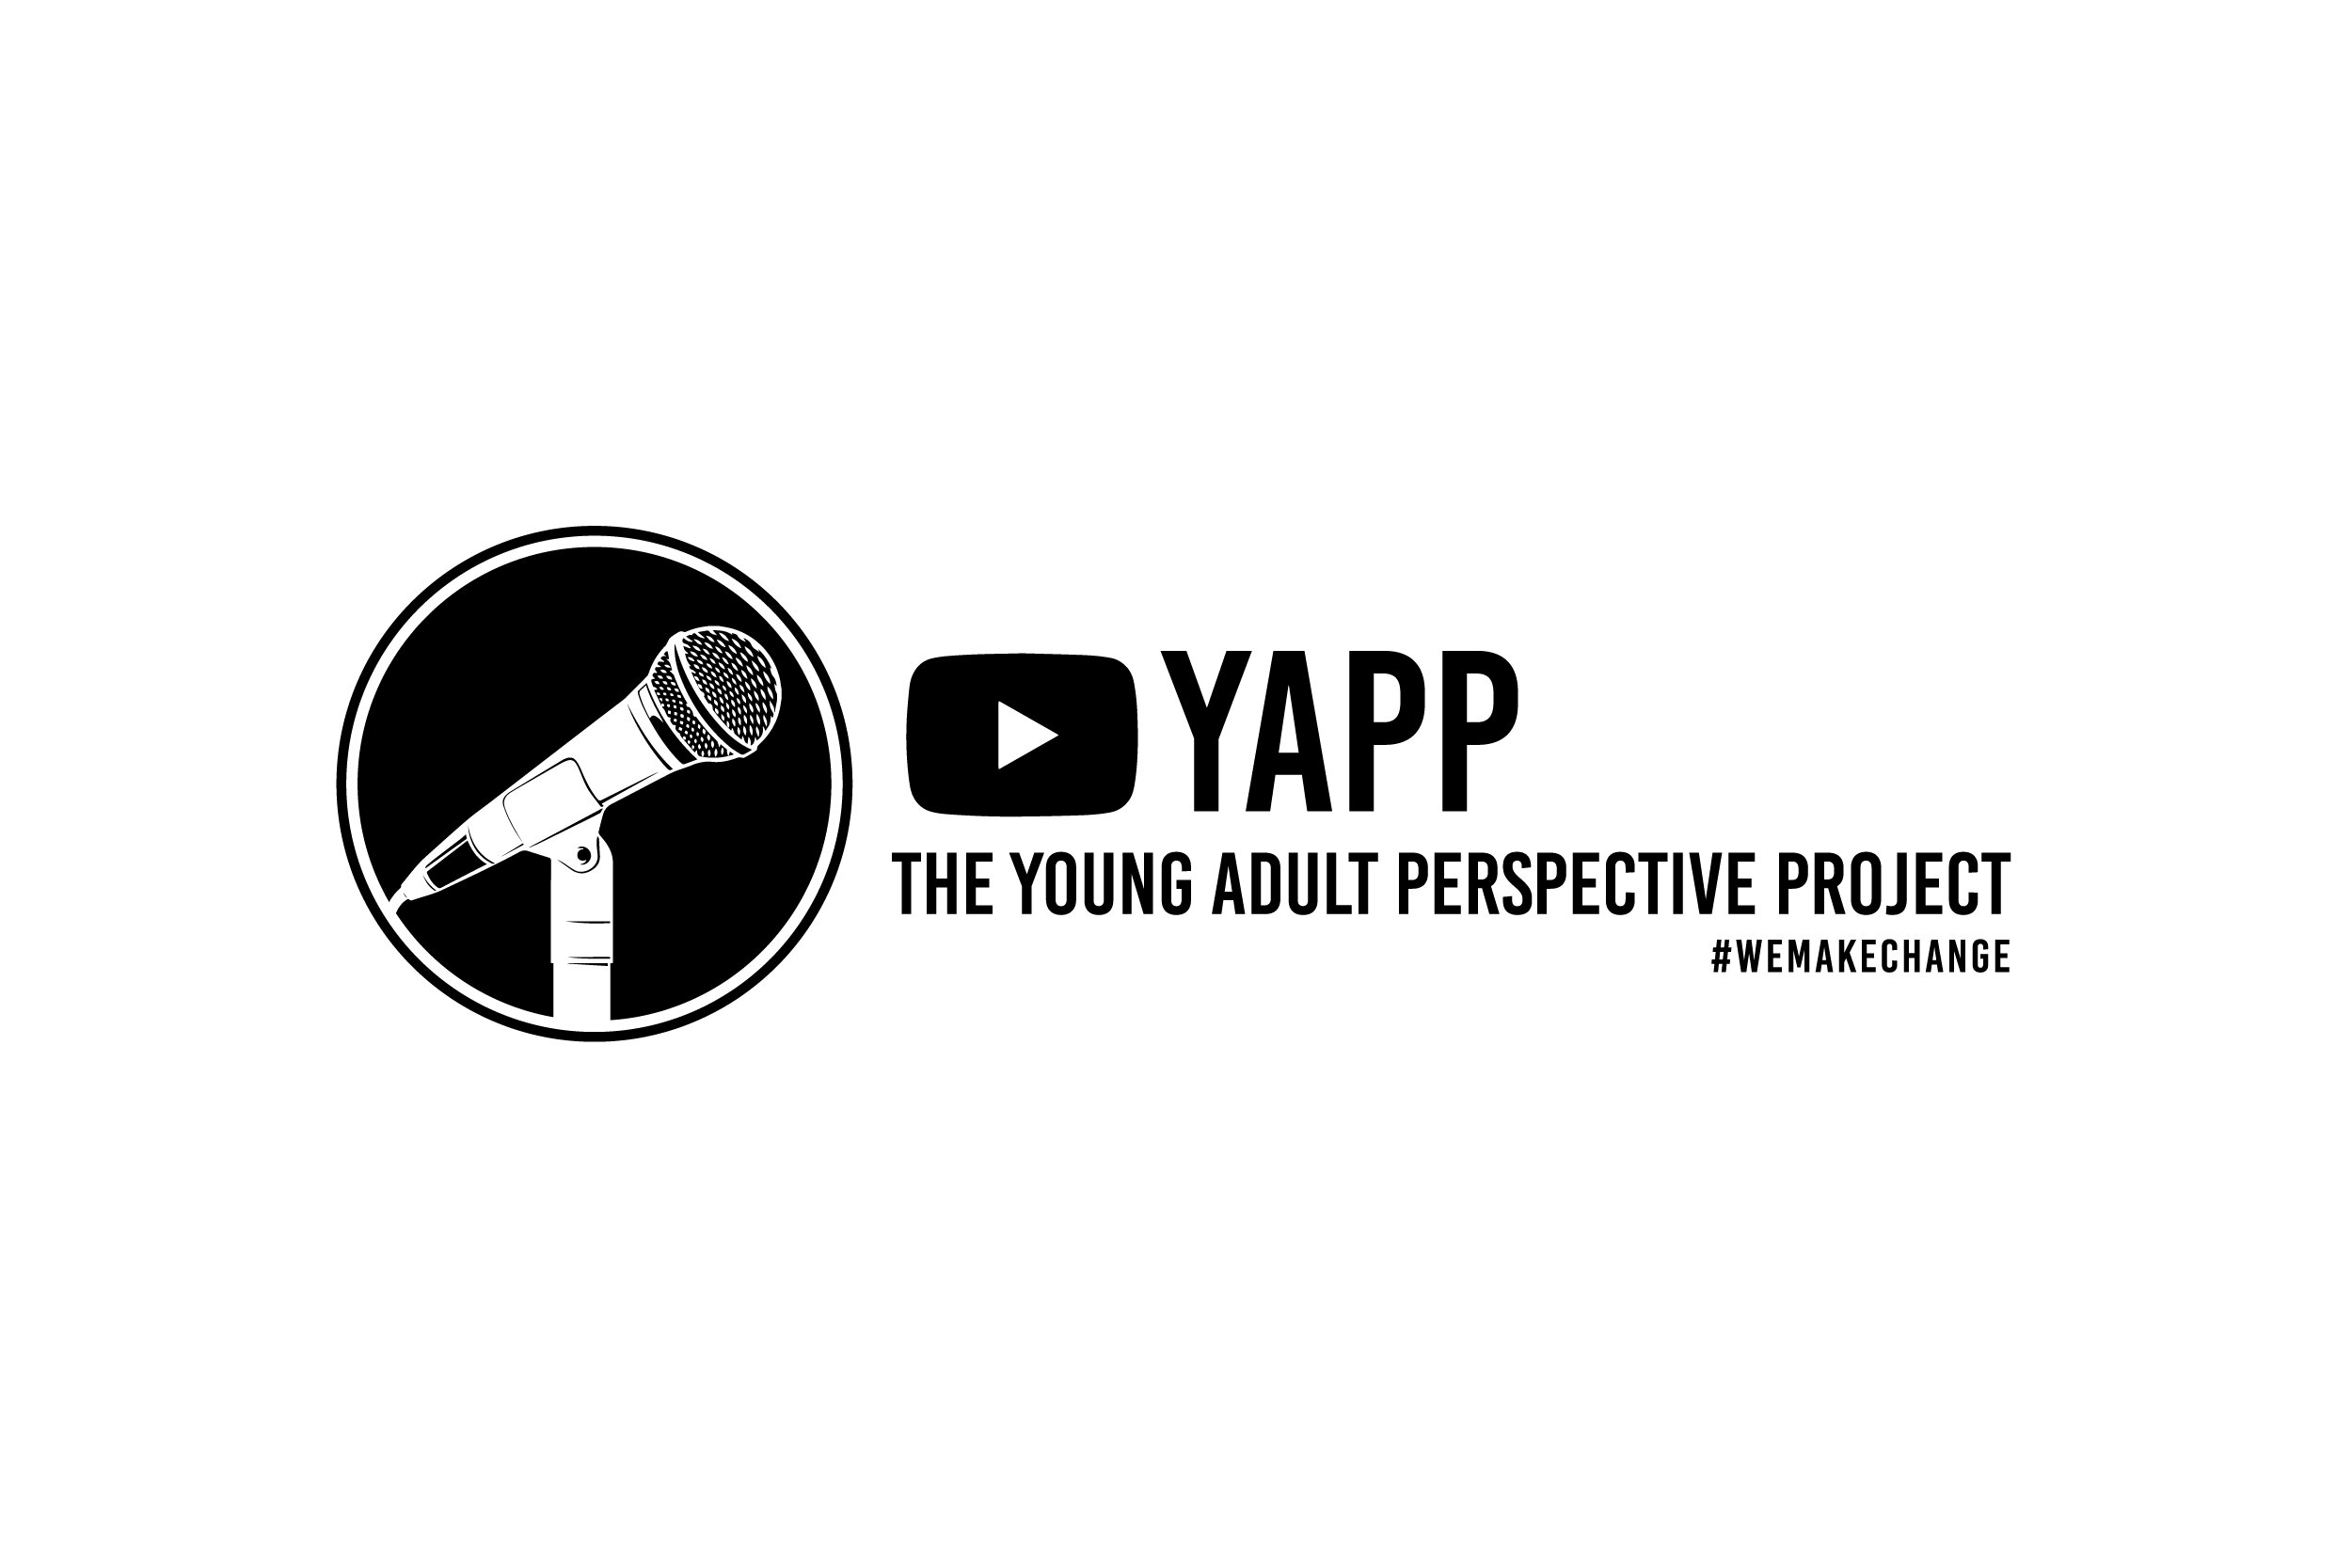 YAPP The Young Adult Perspective Project r1-01.jpg